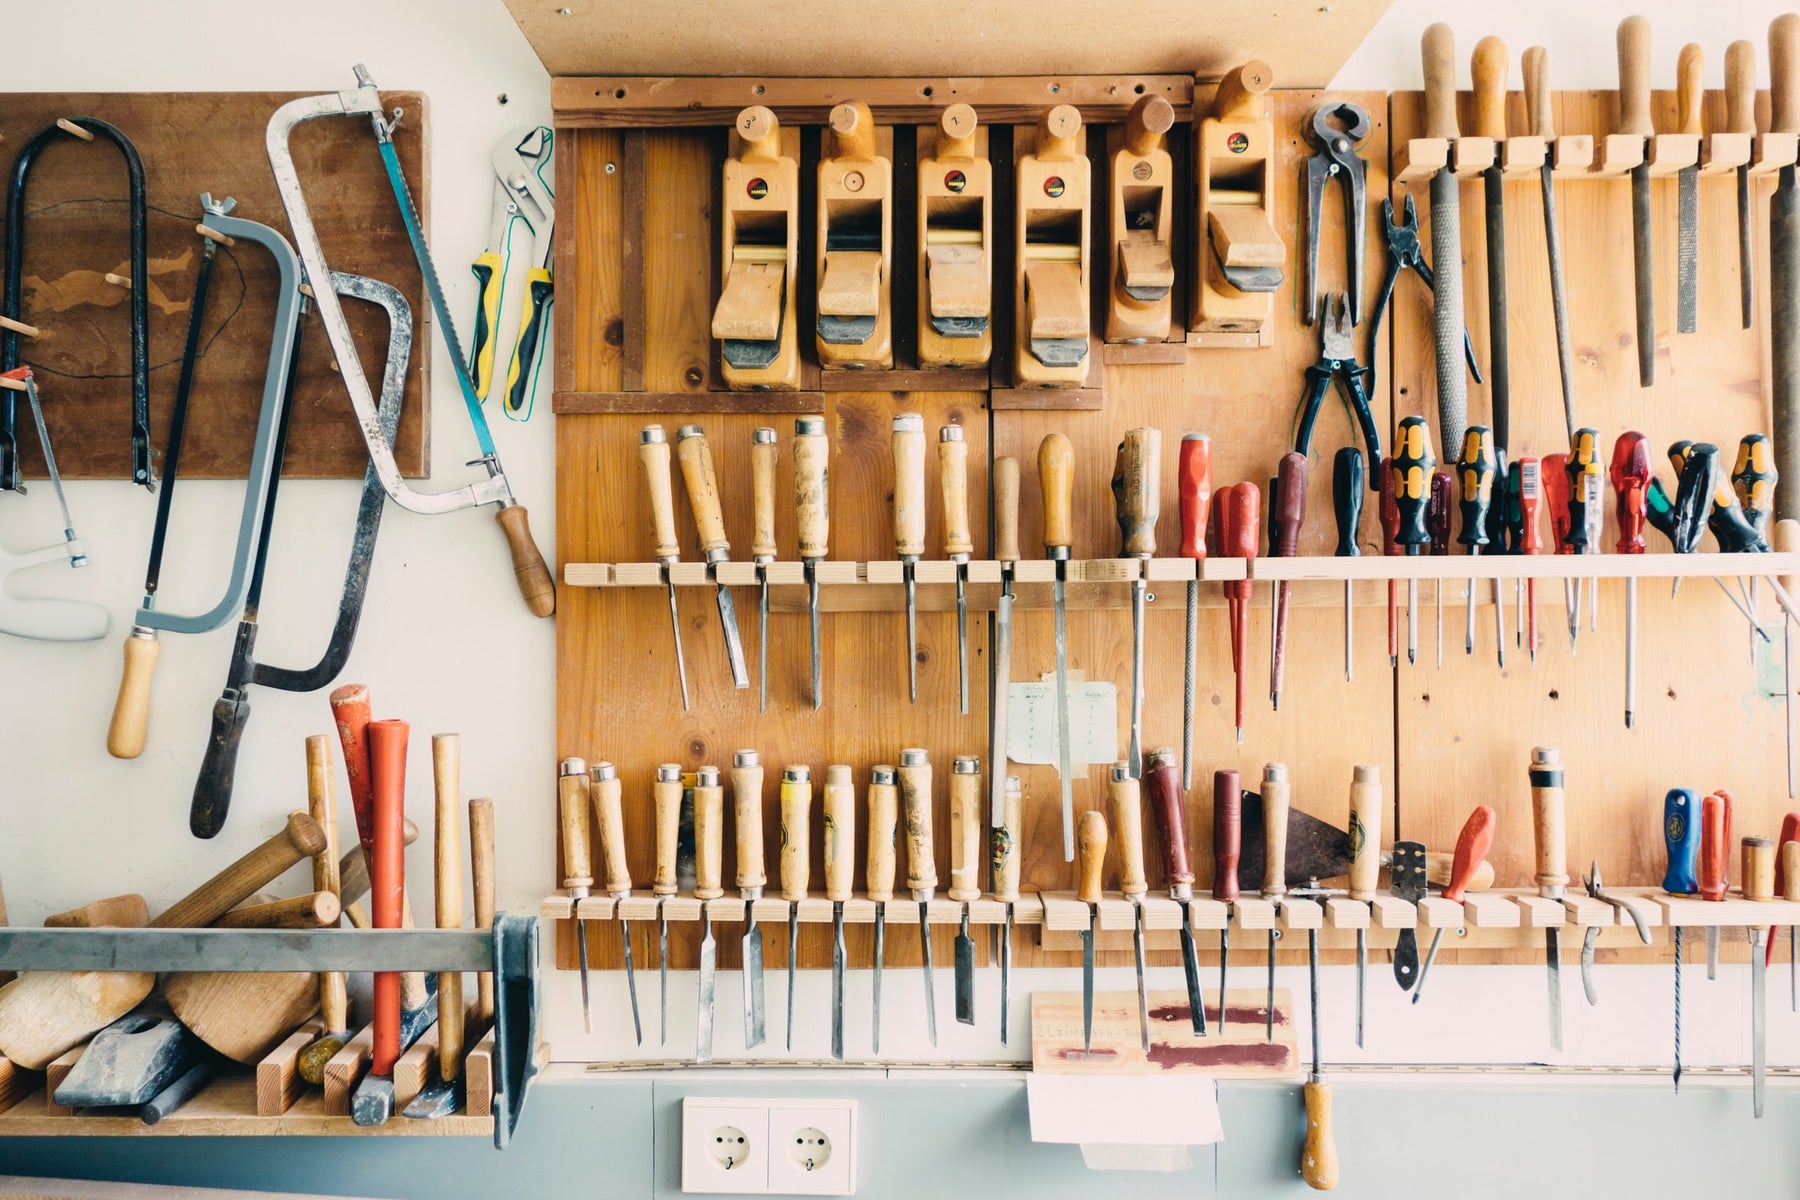 A neatly organized workspace with essential hand tools